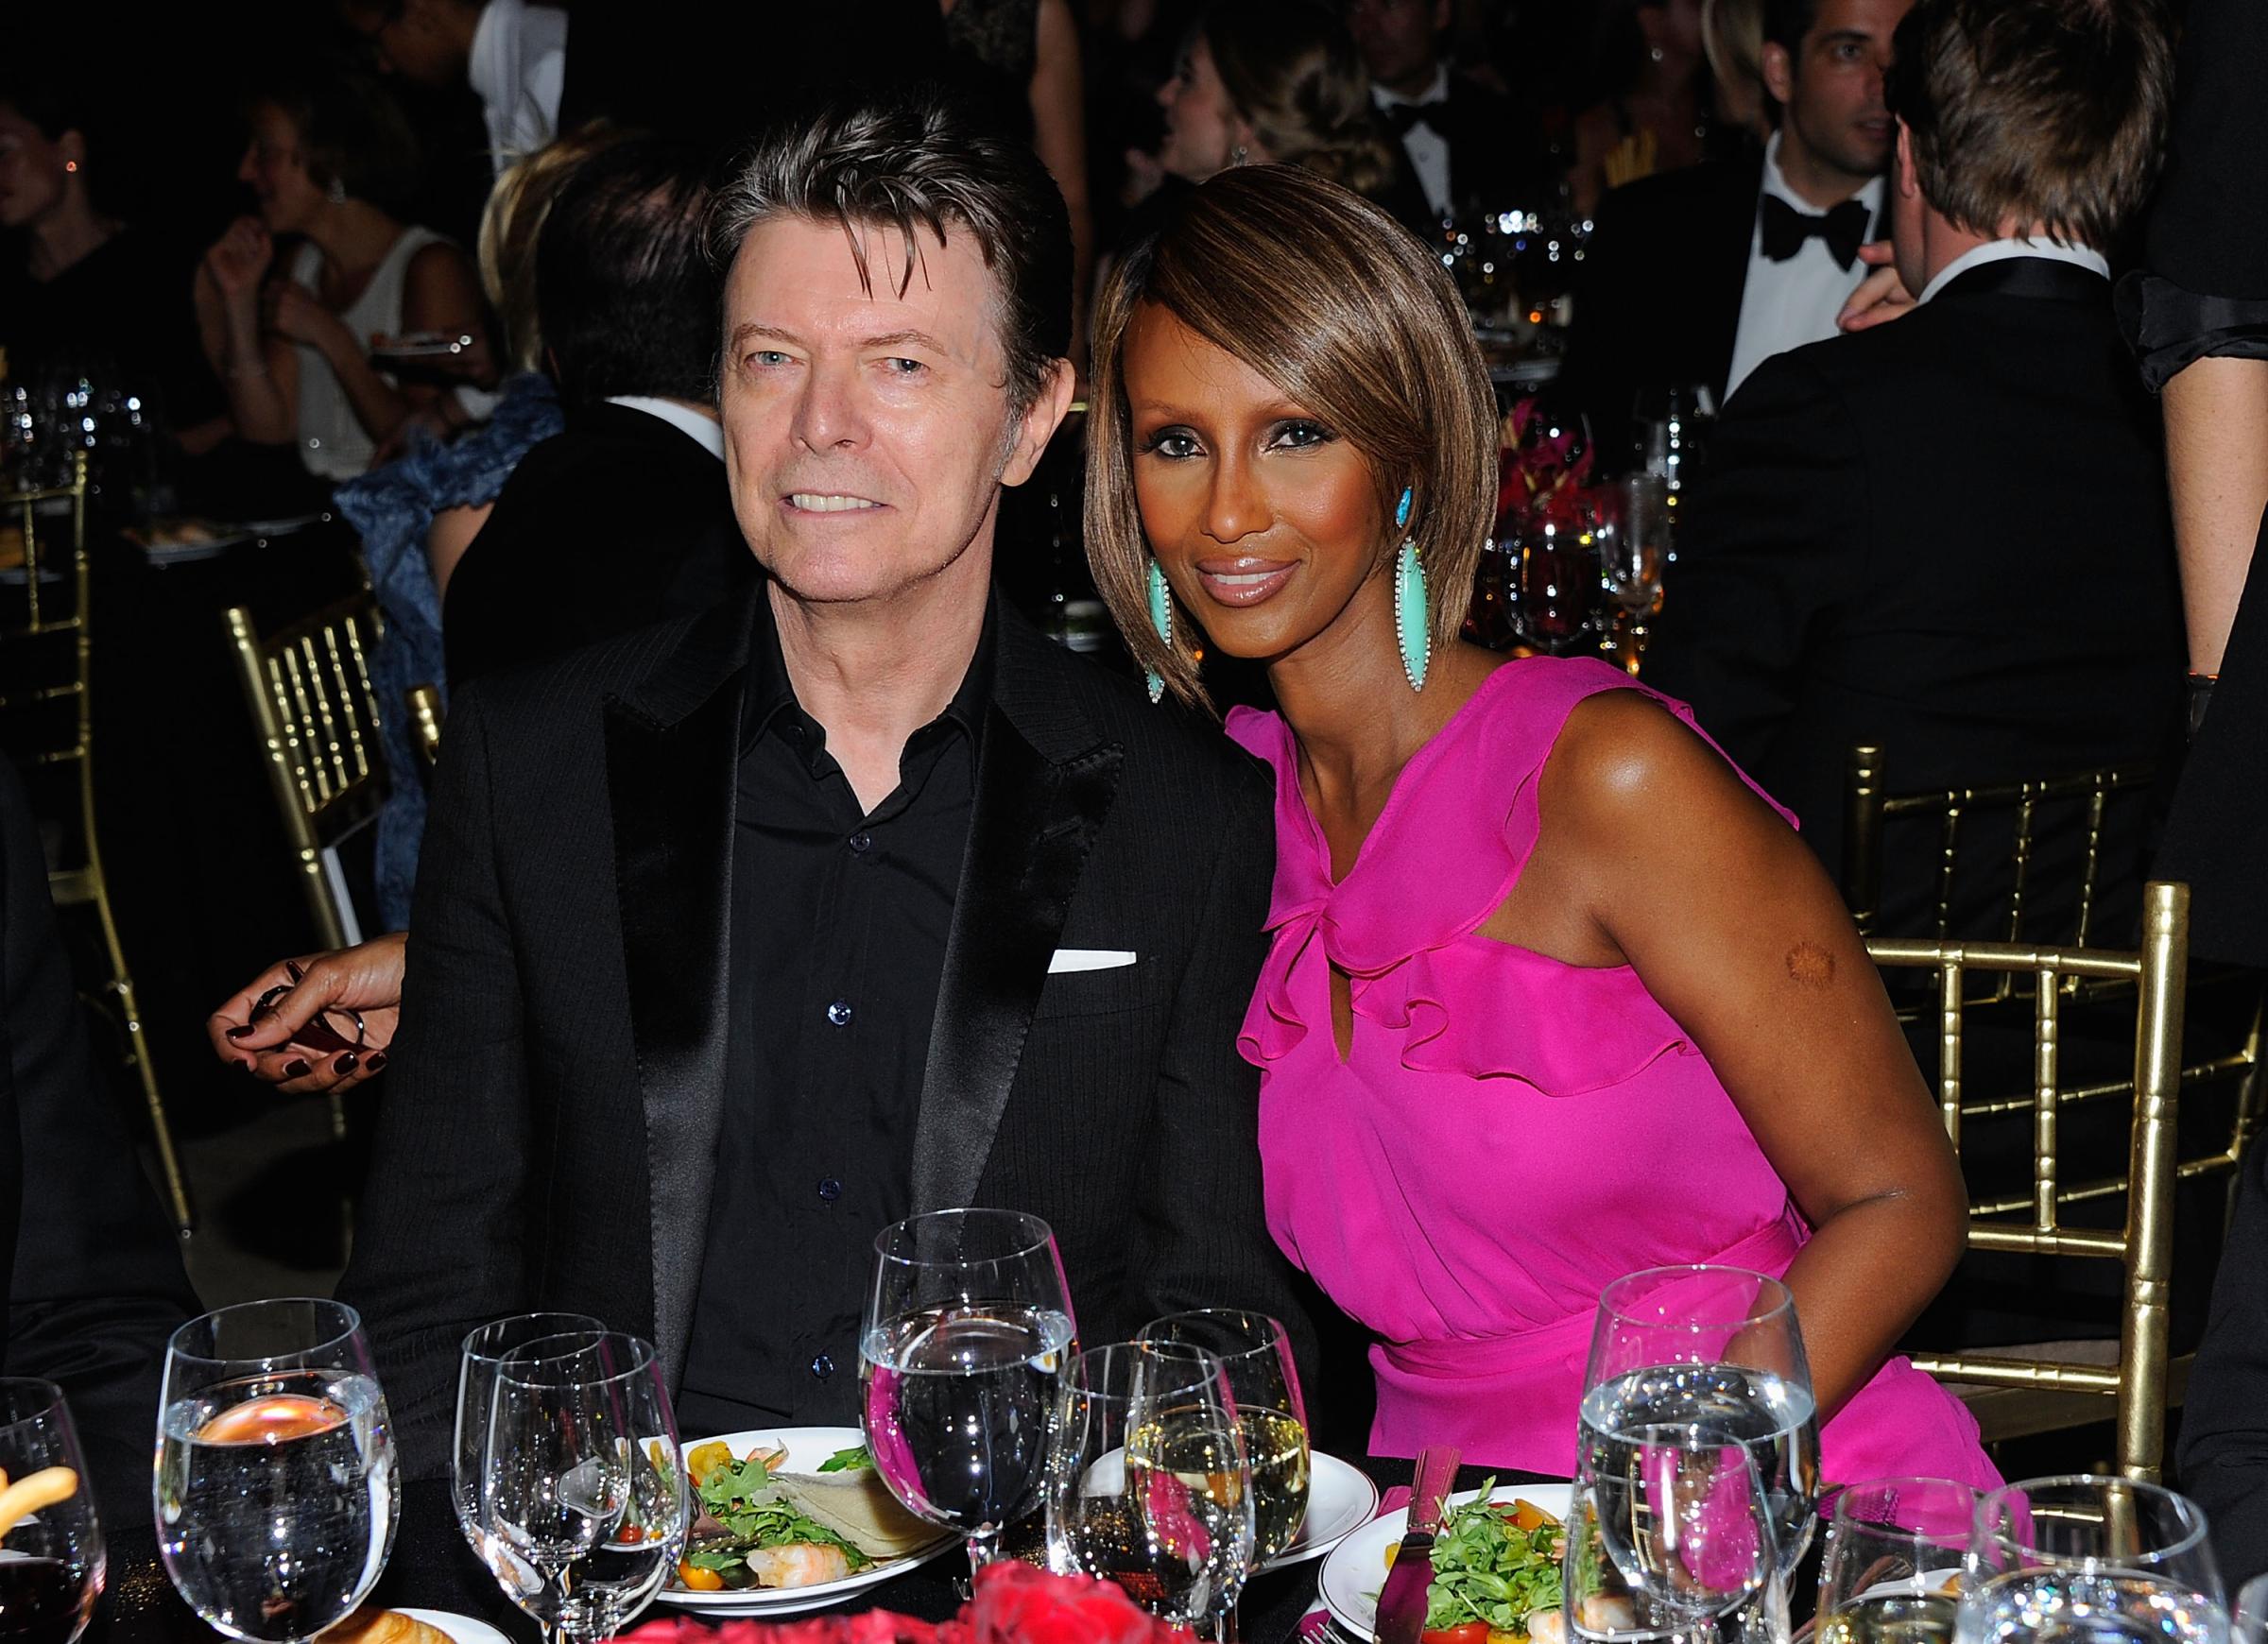 David Bowie and Iman are seen on April 28, 2011 in New York City.